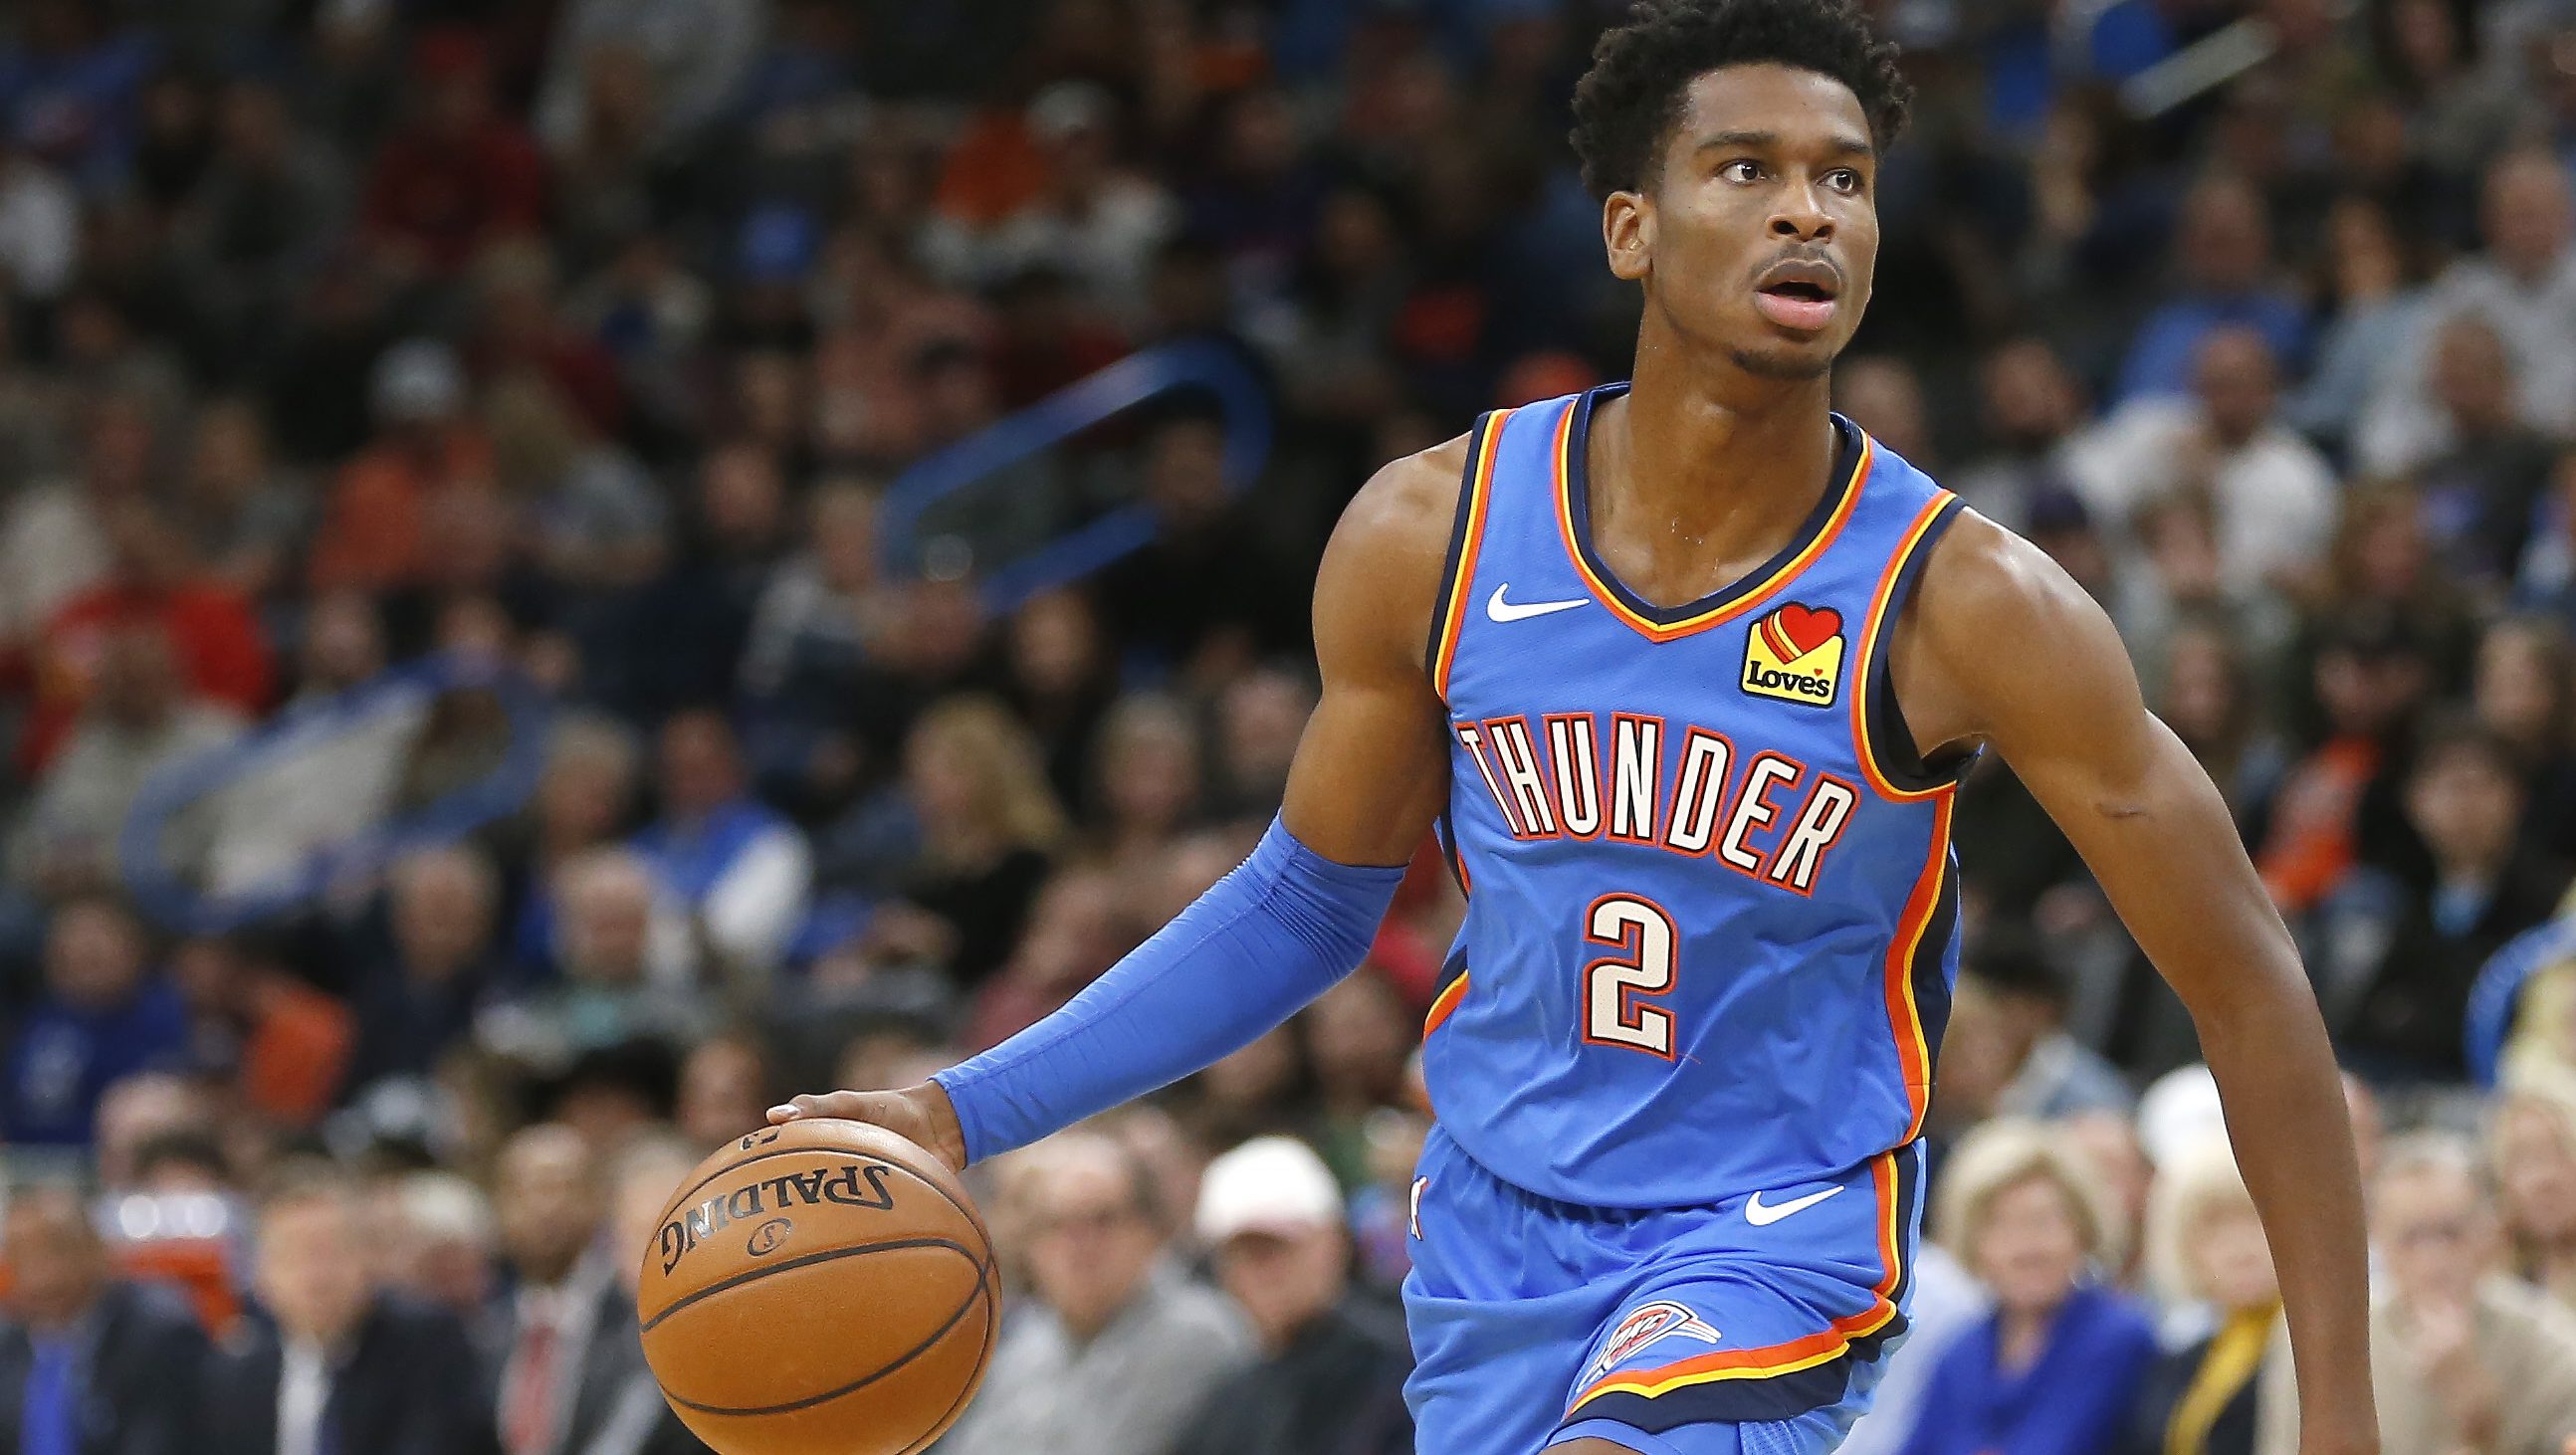 Nuggets vs Thunder Live Stream How to Watch Online